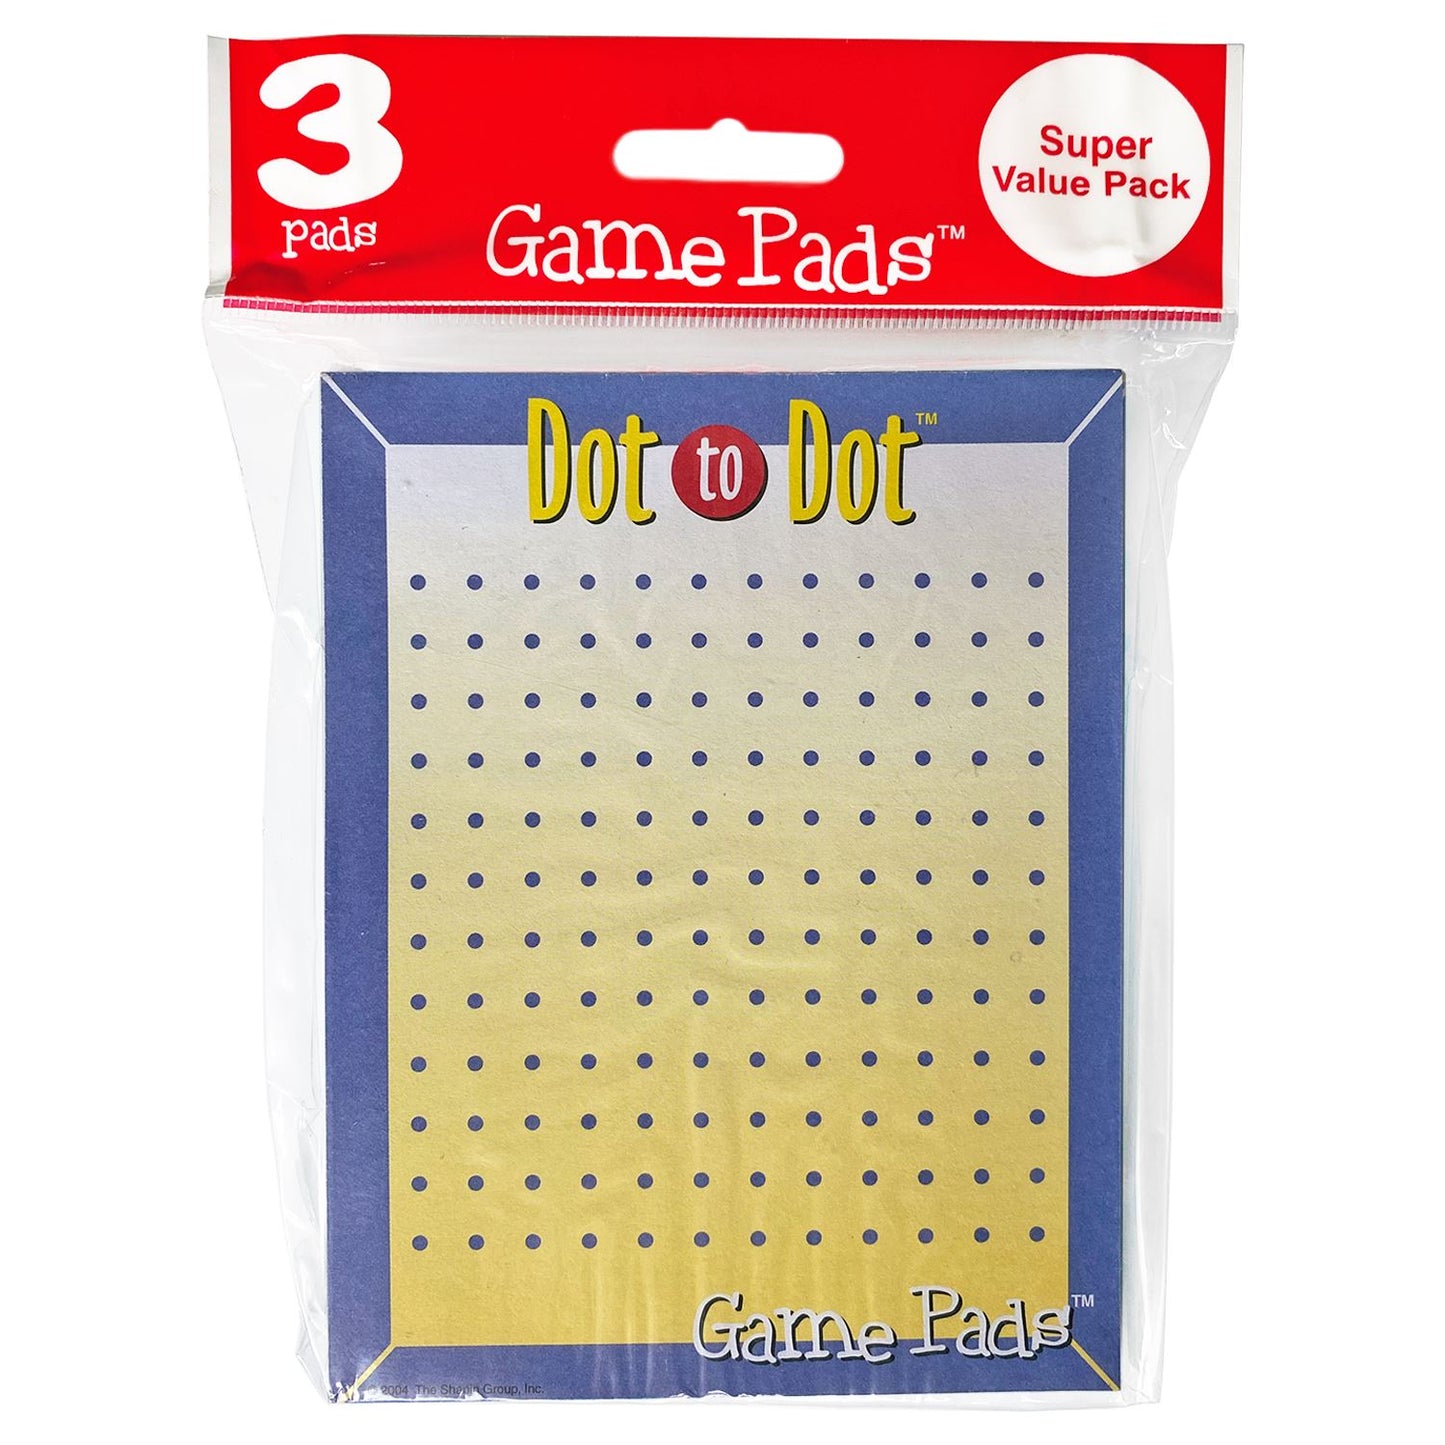 Game Pads™ DOT to DOT™ Game 3 Pads (50 Sheets) Travel Game Kit - Super Value!